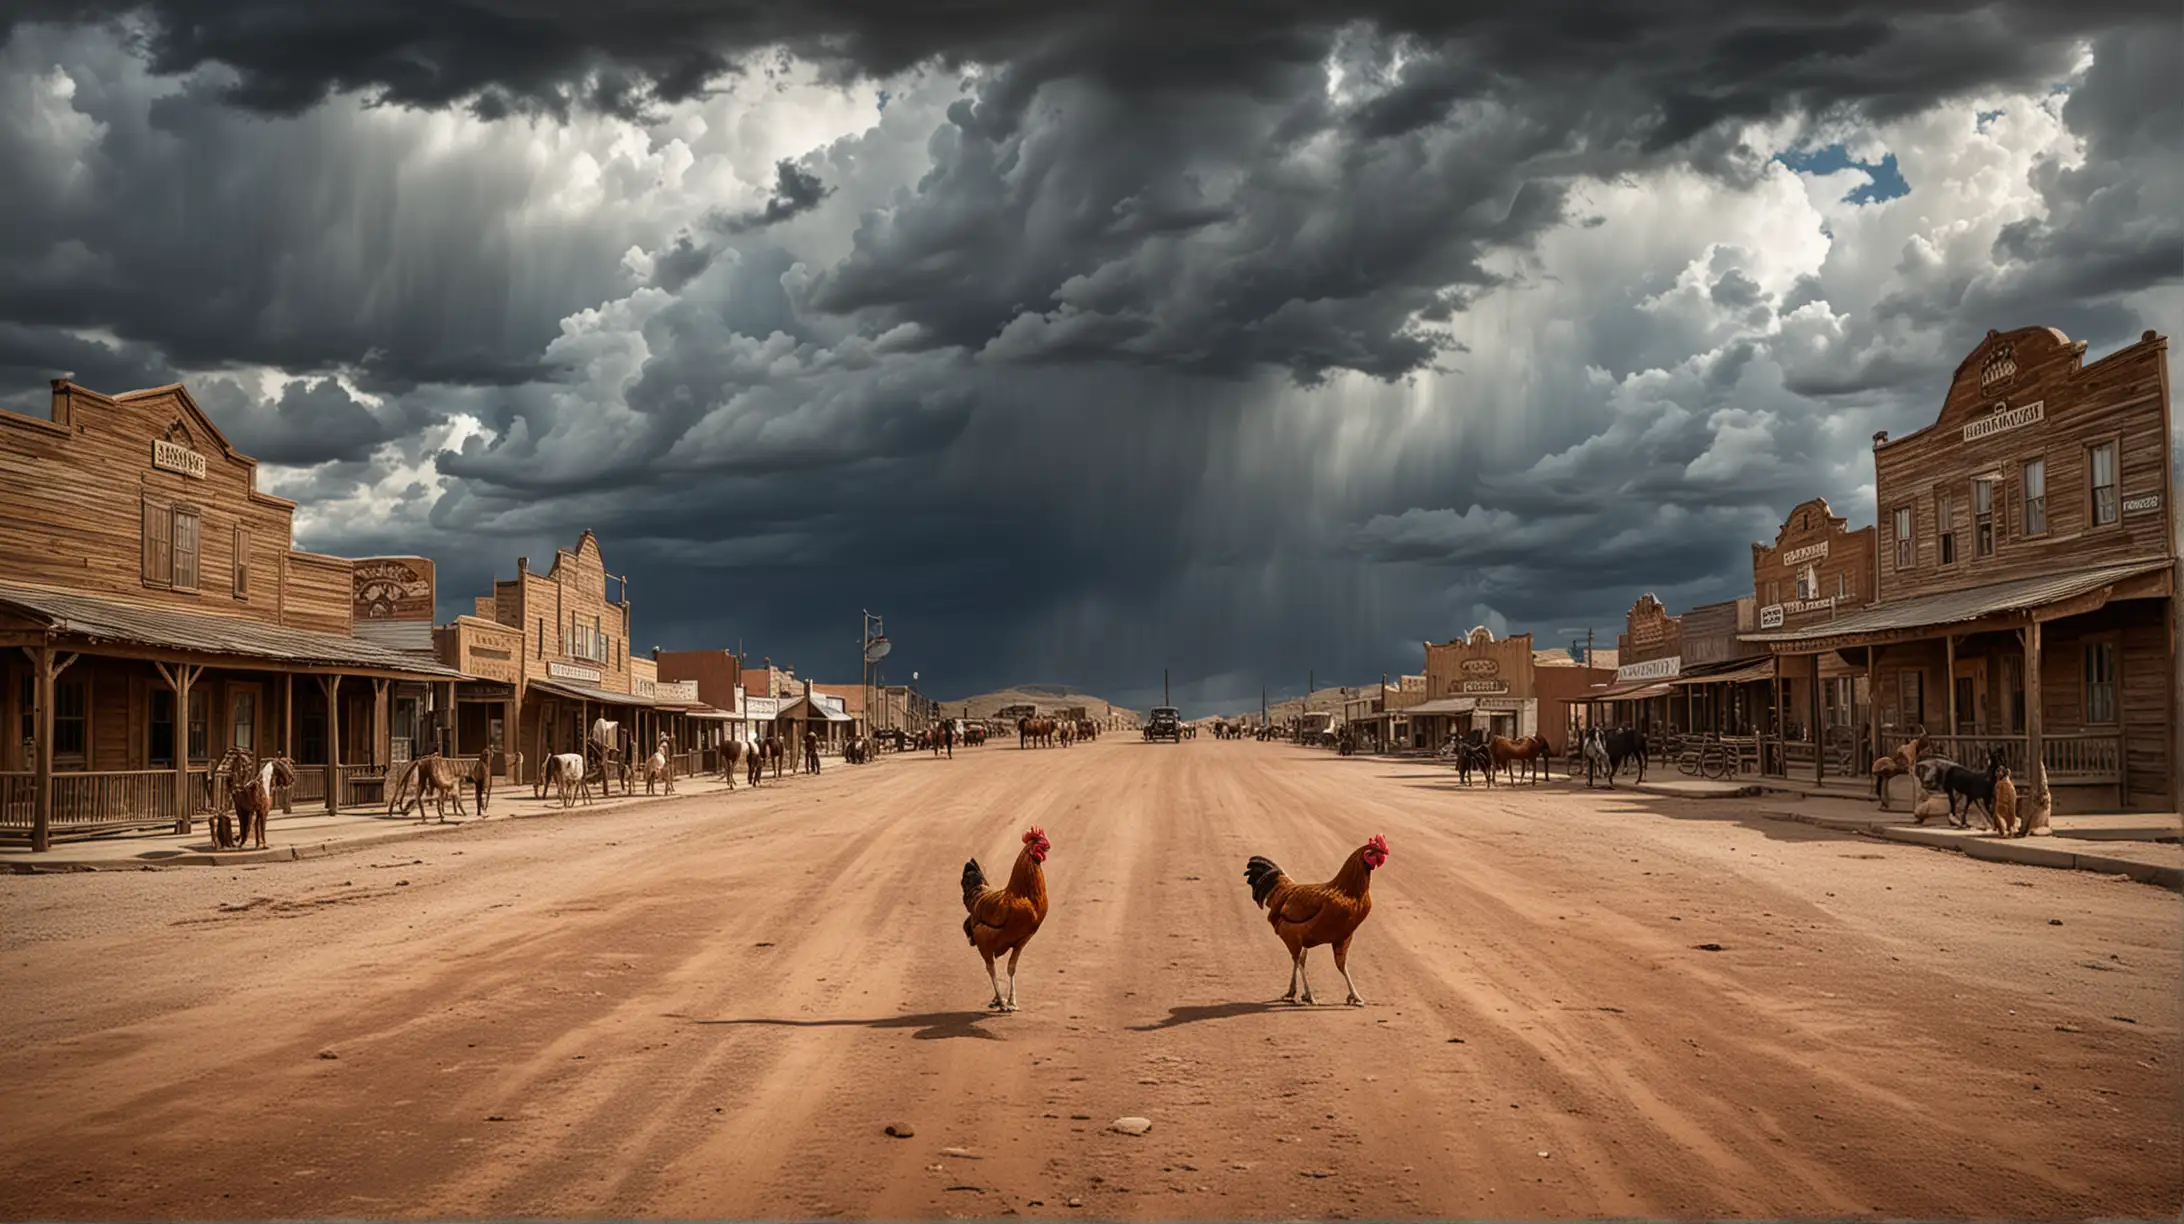 Chicken Crossing Road in Dramatic Old Western Town Scene